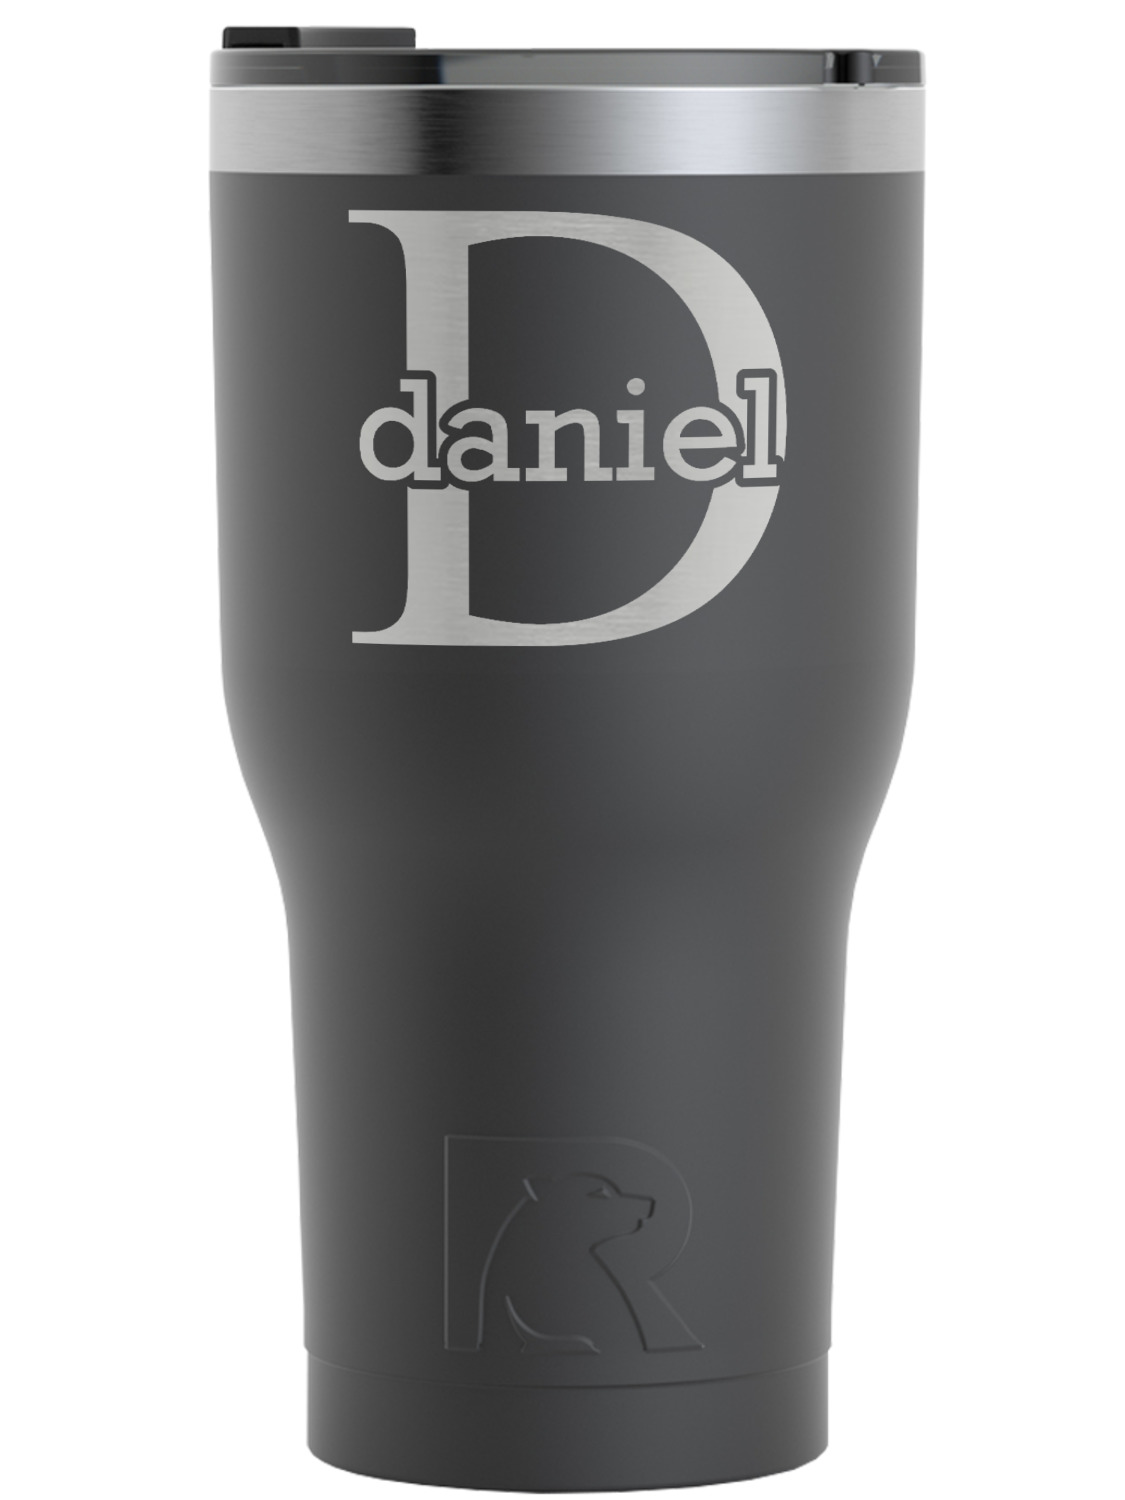 https://www.youcustomizeit.com/common/MAKE/837778/Name-Initial-for-Guys-Black-RTIC-Tumbler-Front-2.jpg?lm=1665683216